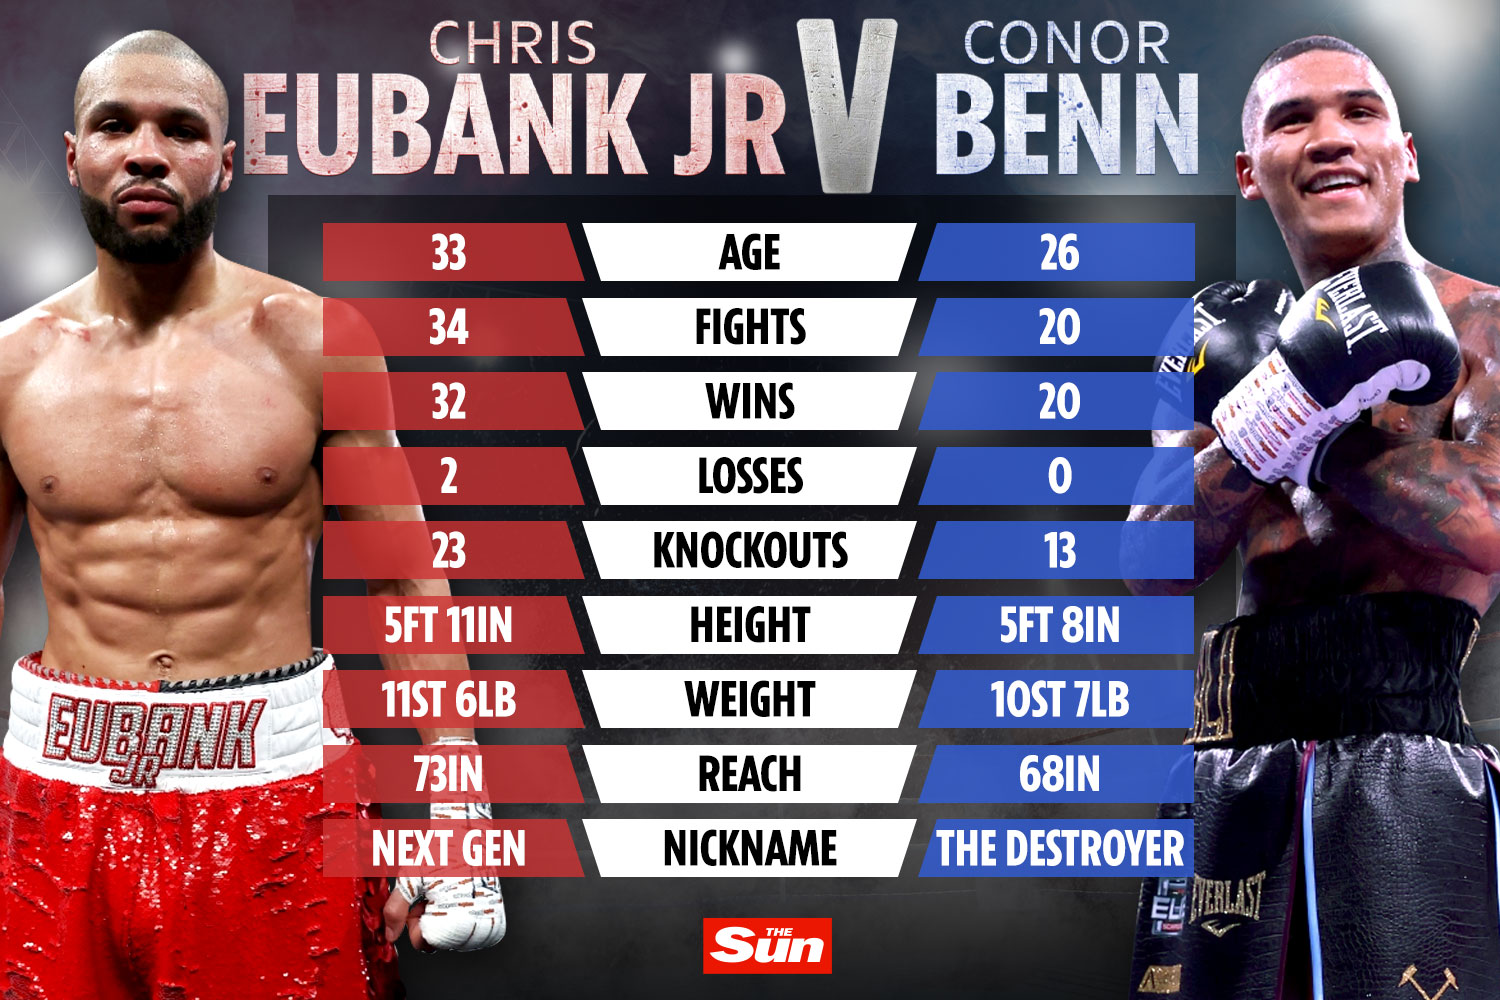 , Chris Eubank Jr vs Conor Benn officially CANCELLED after failed drugs test as Eddie Hearn loses appeal